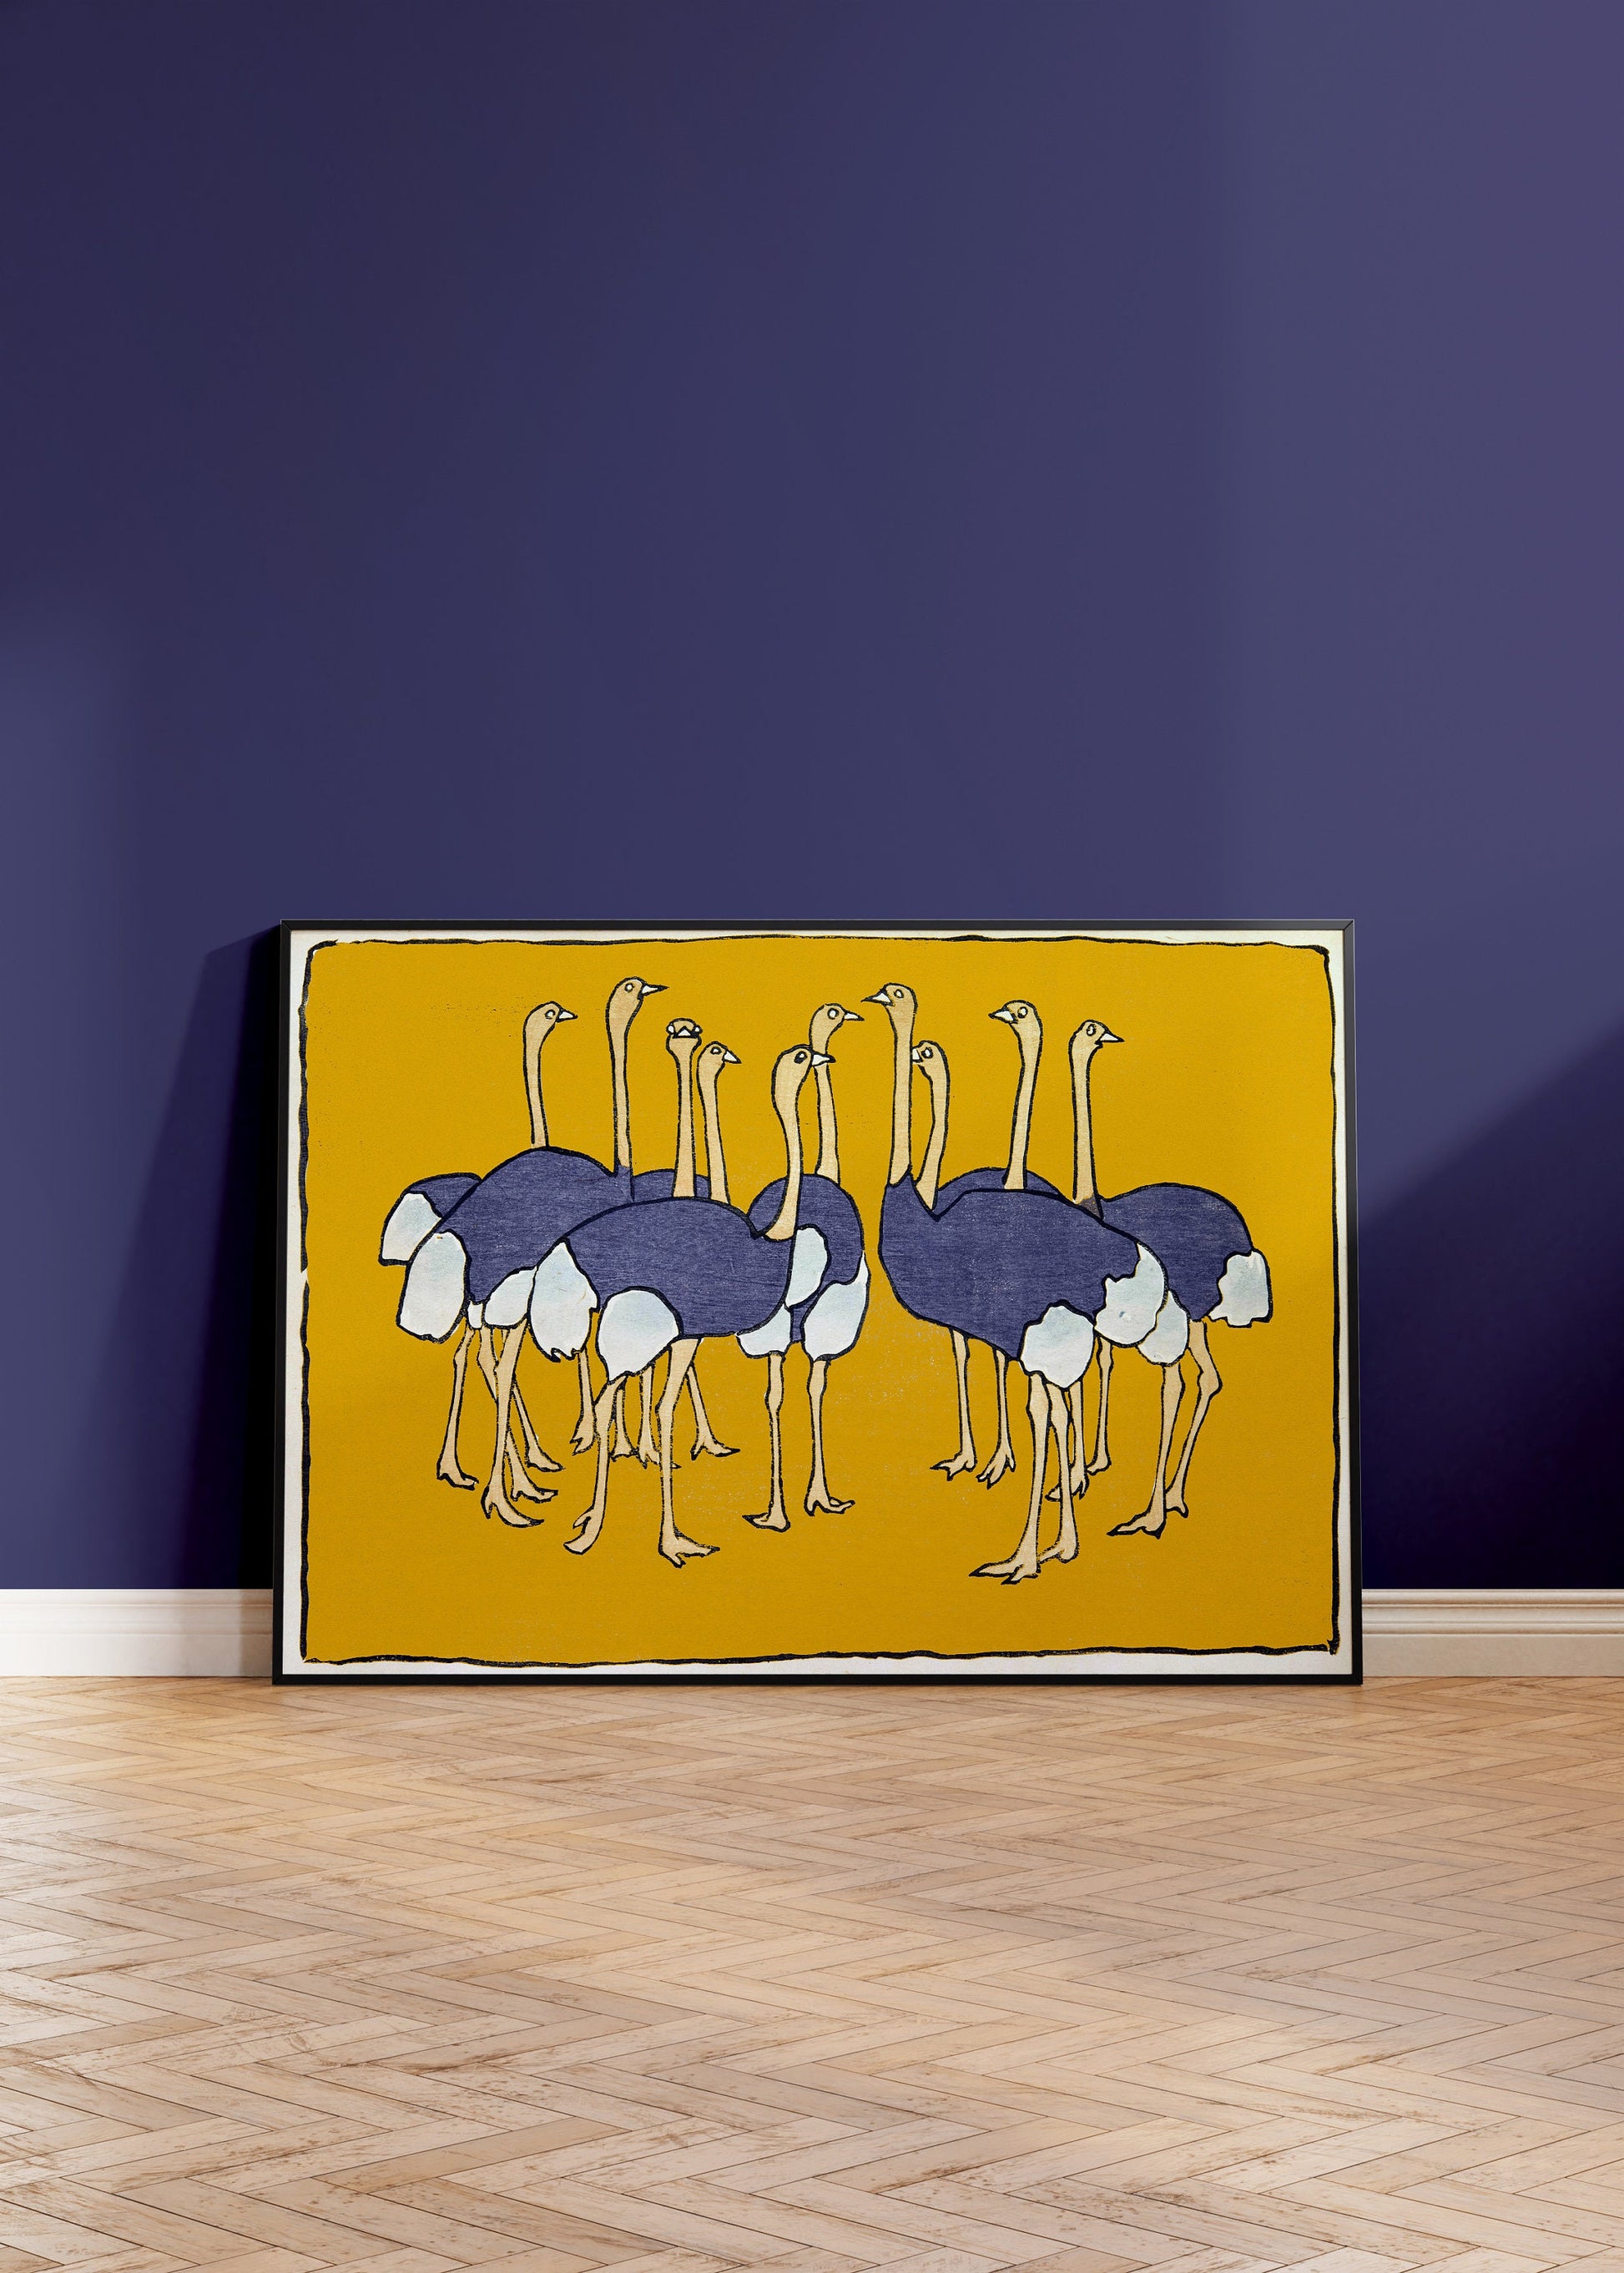 Asai Chū - Ostriches | From Mokugo zuanshū Pl.21 (1908) Vintage Japanese Art in Yellow (Available framed or unframed)